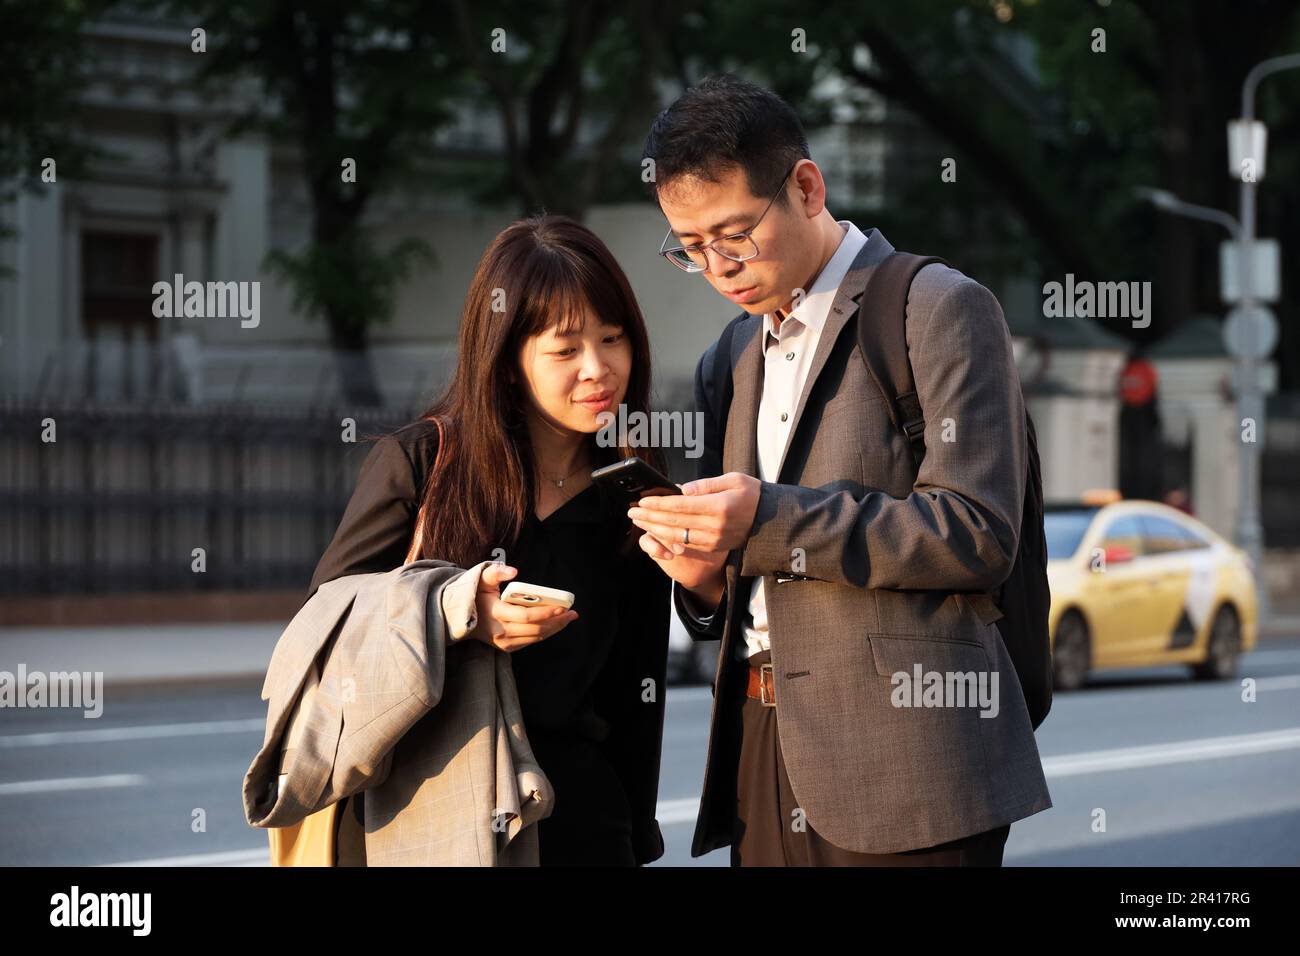 Asian couple standing with smartphones on city street on taxi car background Stock Photo